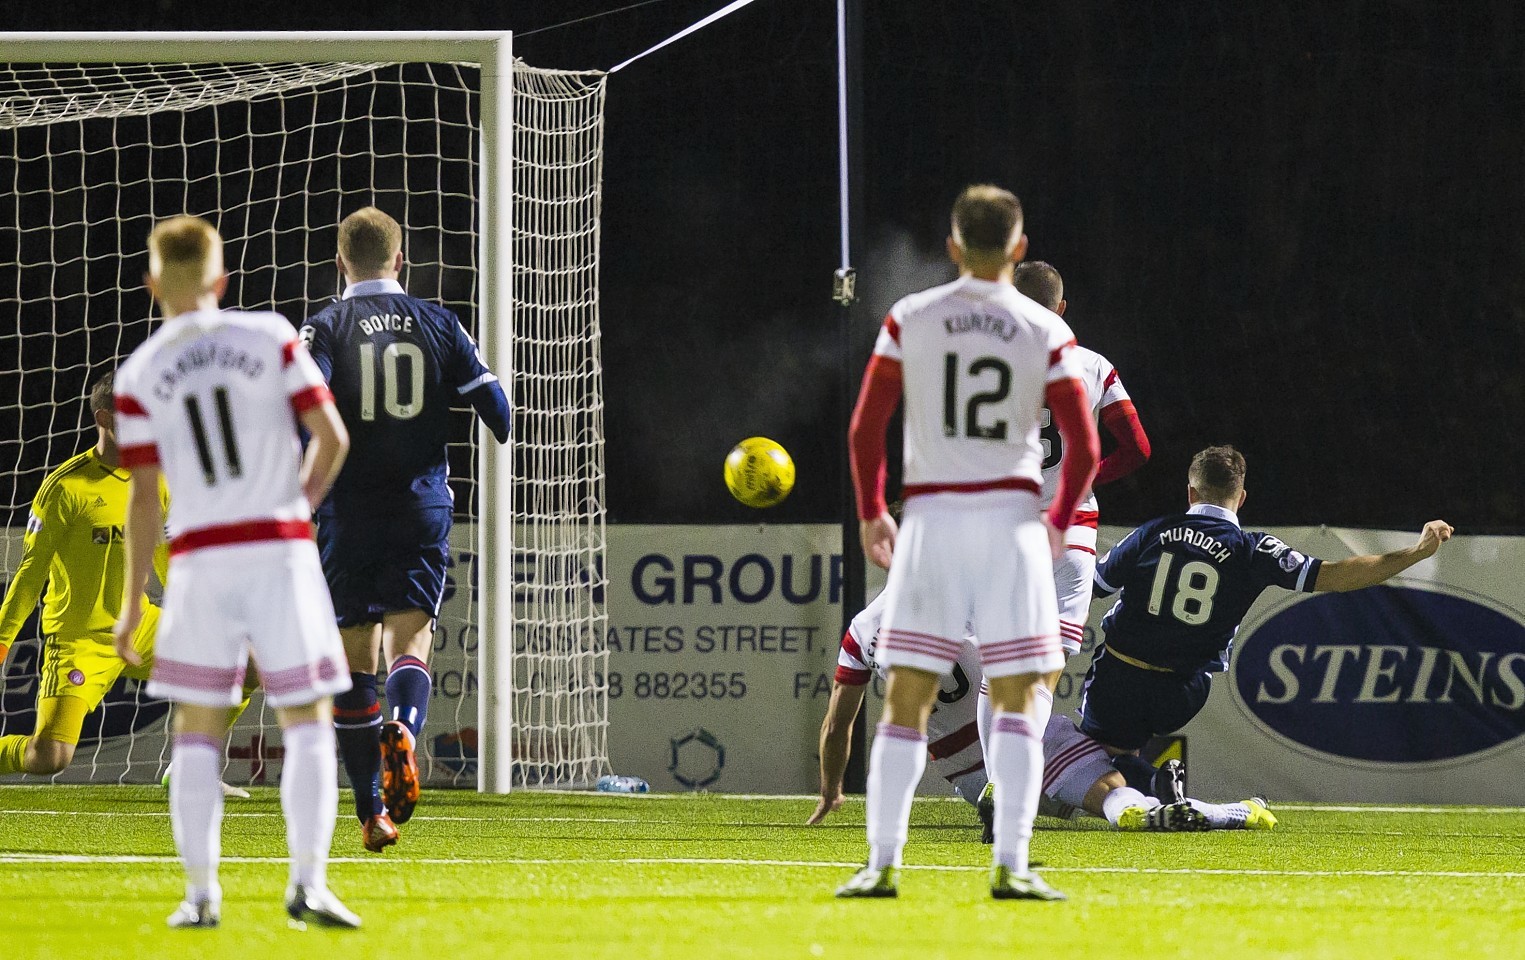 Ross County's Stewart Murdoch (right) fires the ball into the net